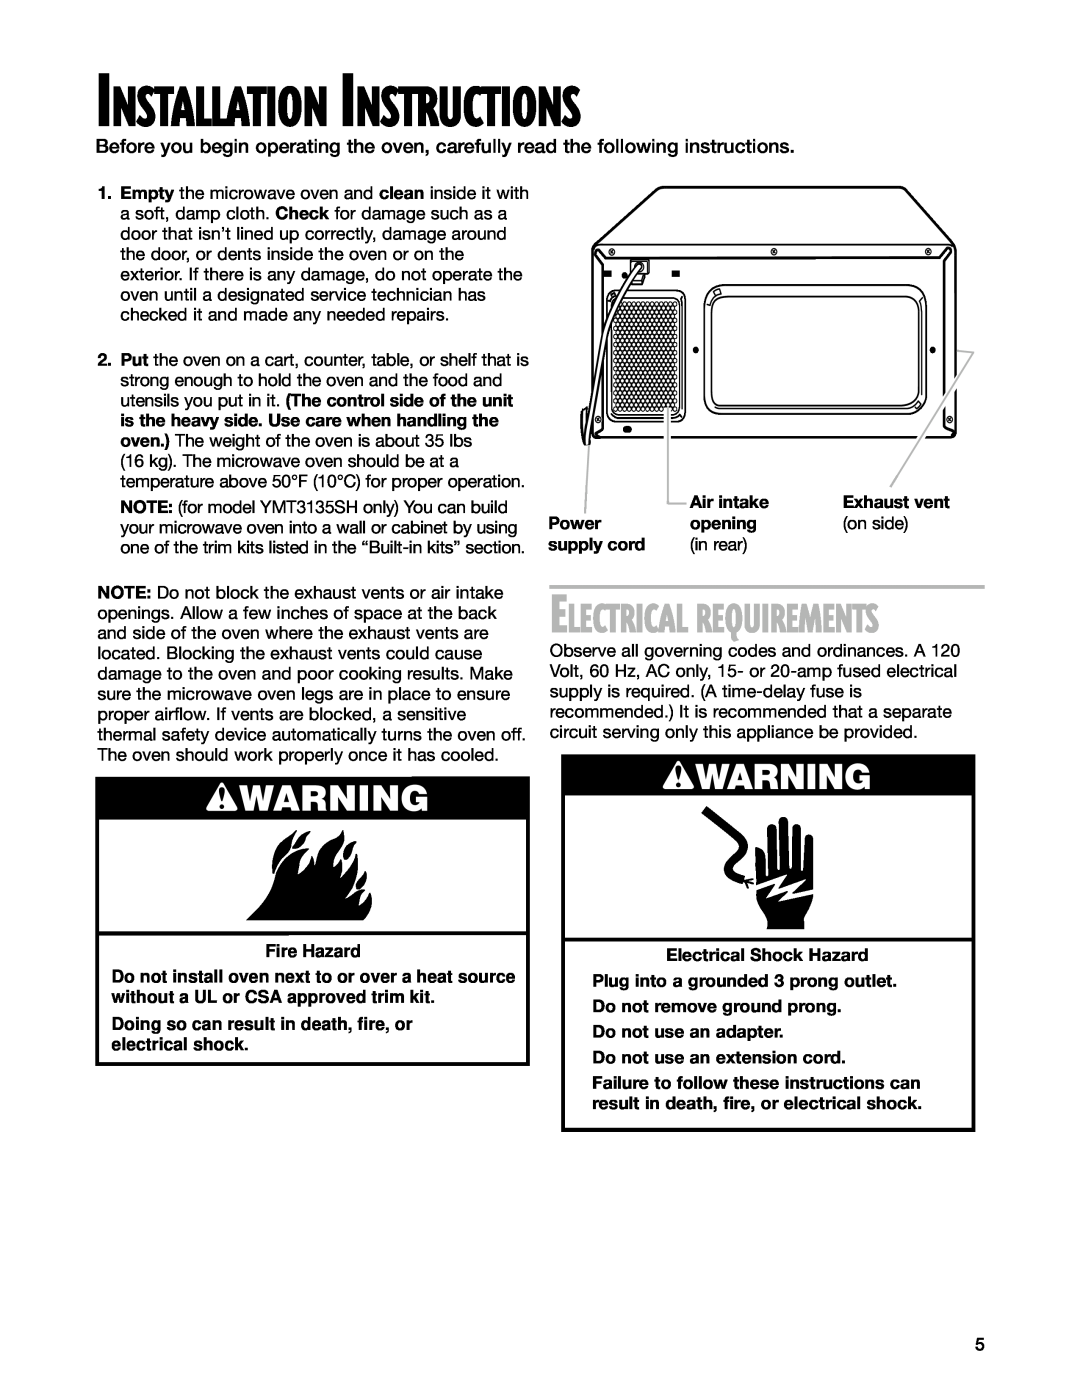 Whirlpool YMT3115SH, YMT3135SH installation instructions wWARNING, Electrical Requirements, Installation Instructions 